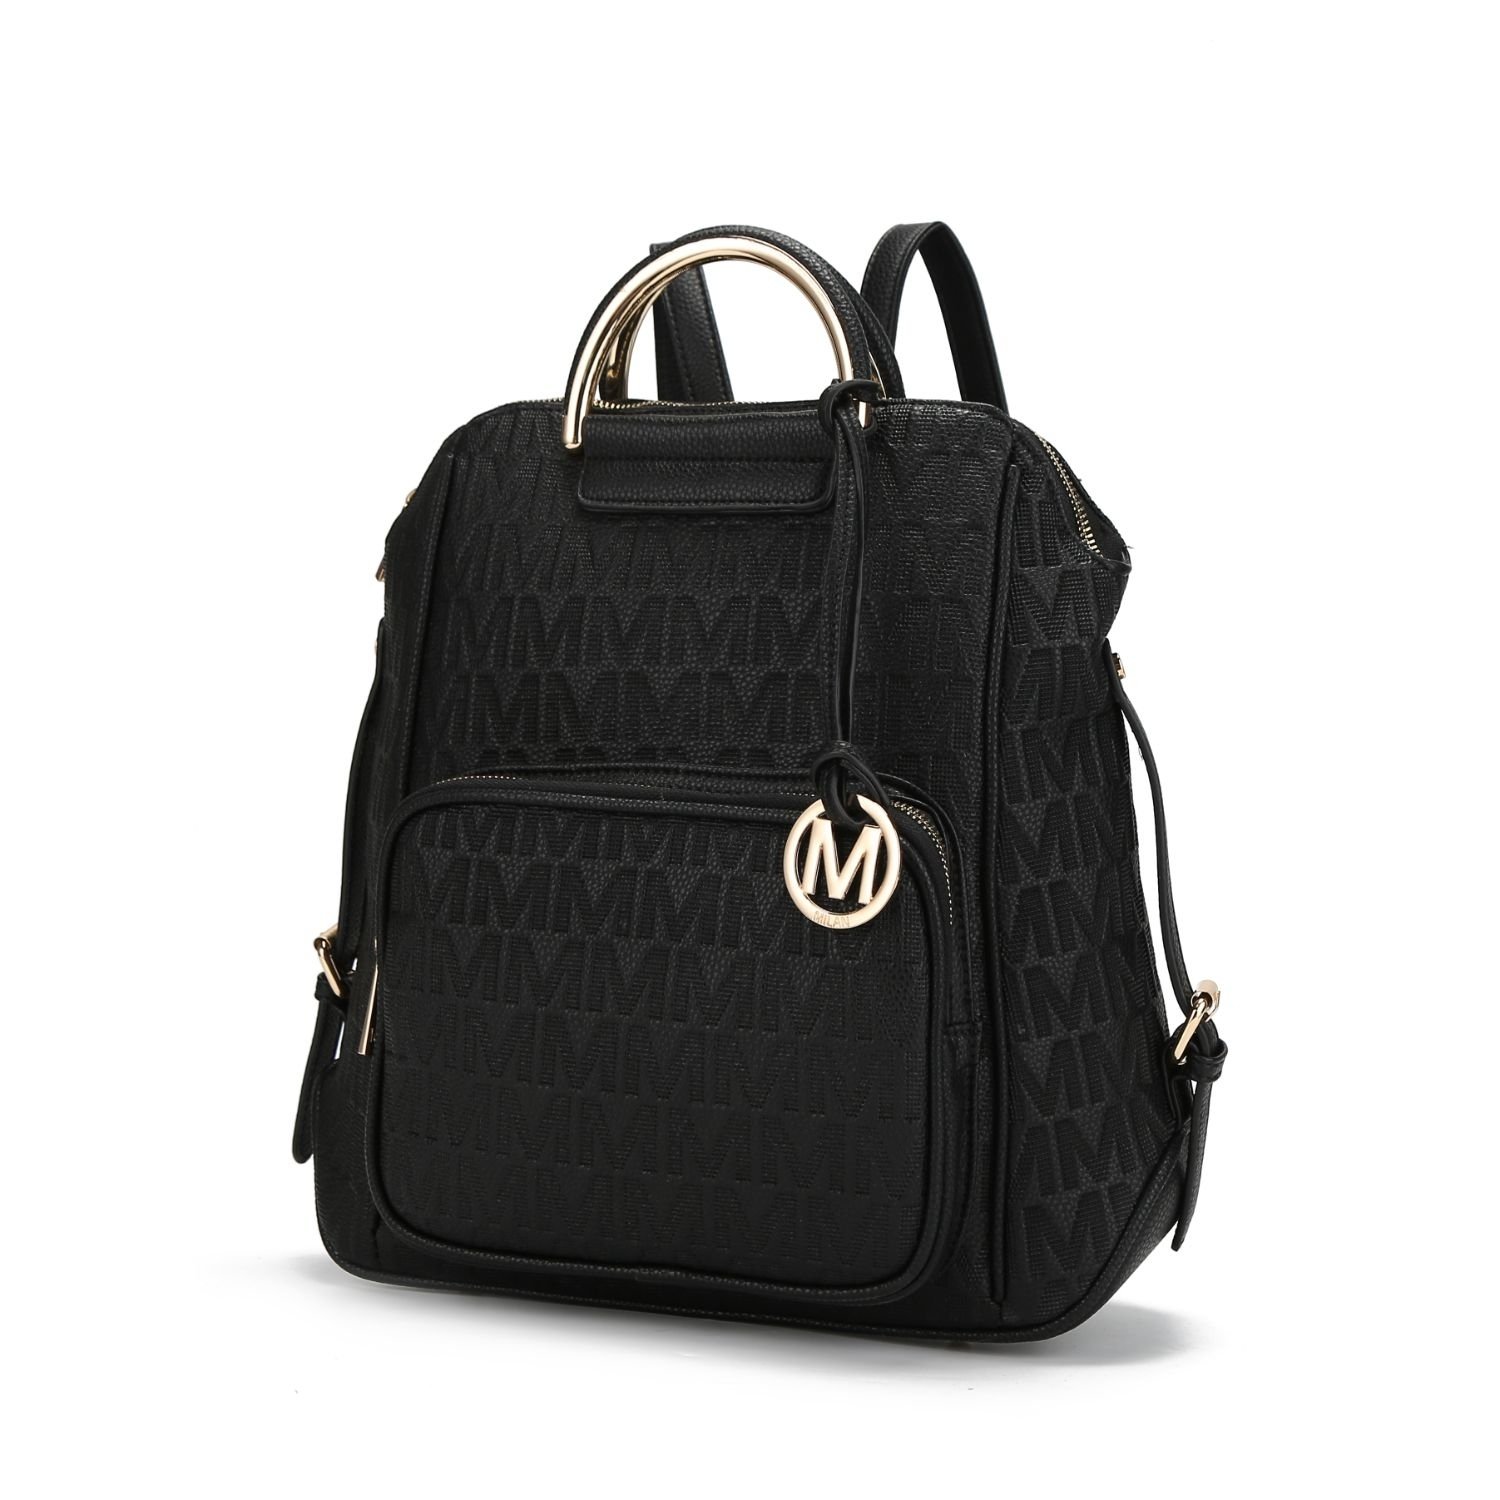 MKF Collection Torra Milan .M. Signature Trendy Backpack By Mia K. - Camel